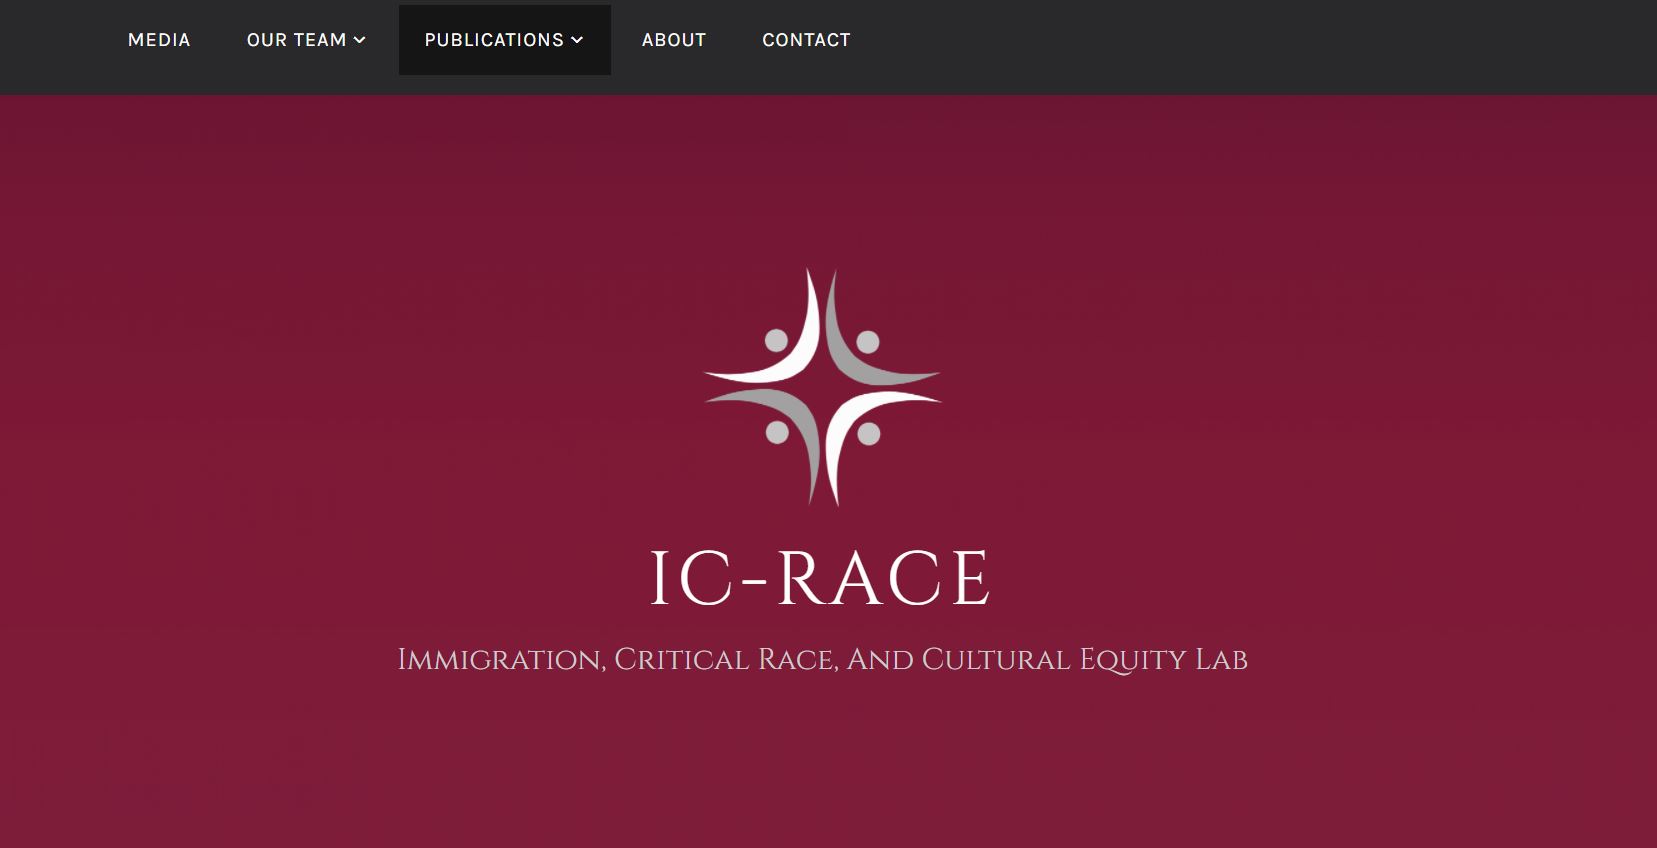 IC-Race: Immigration, Critical Race, And Cultural Equity Lab